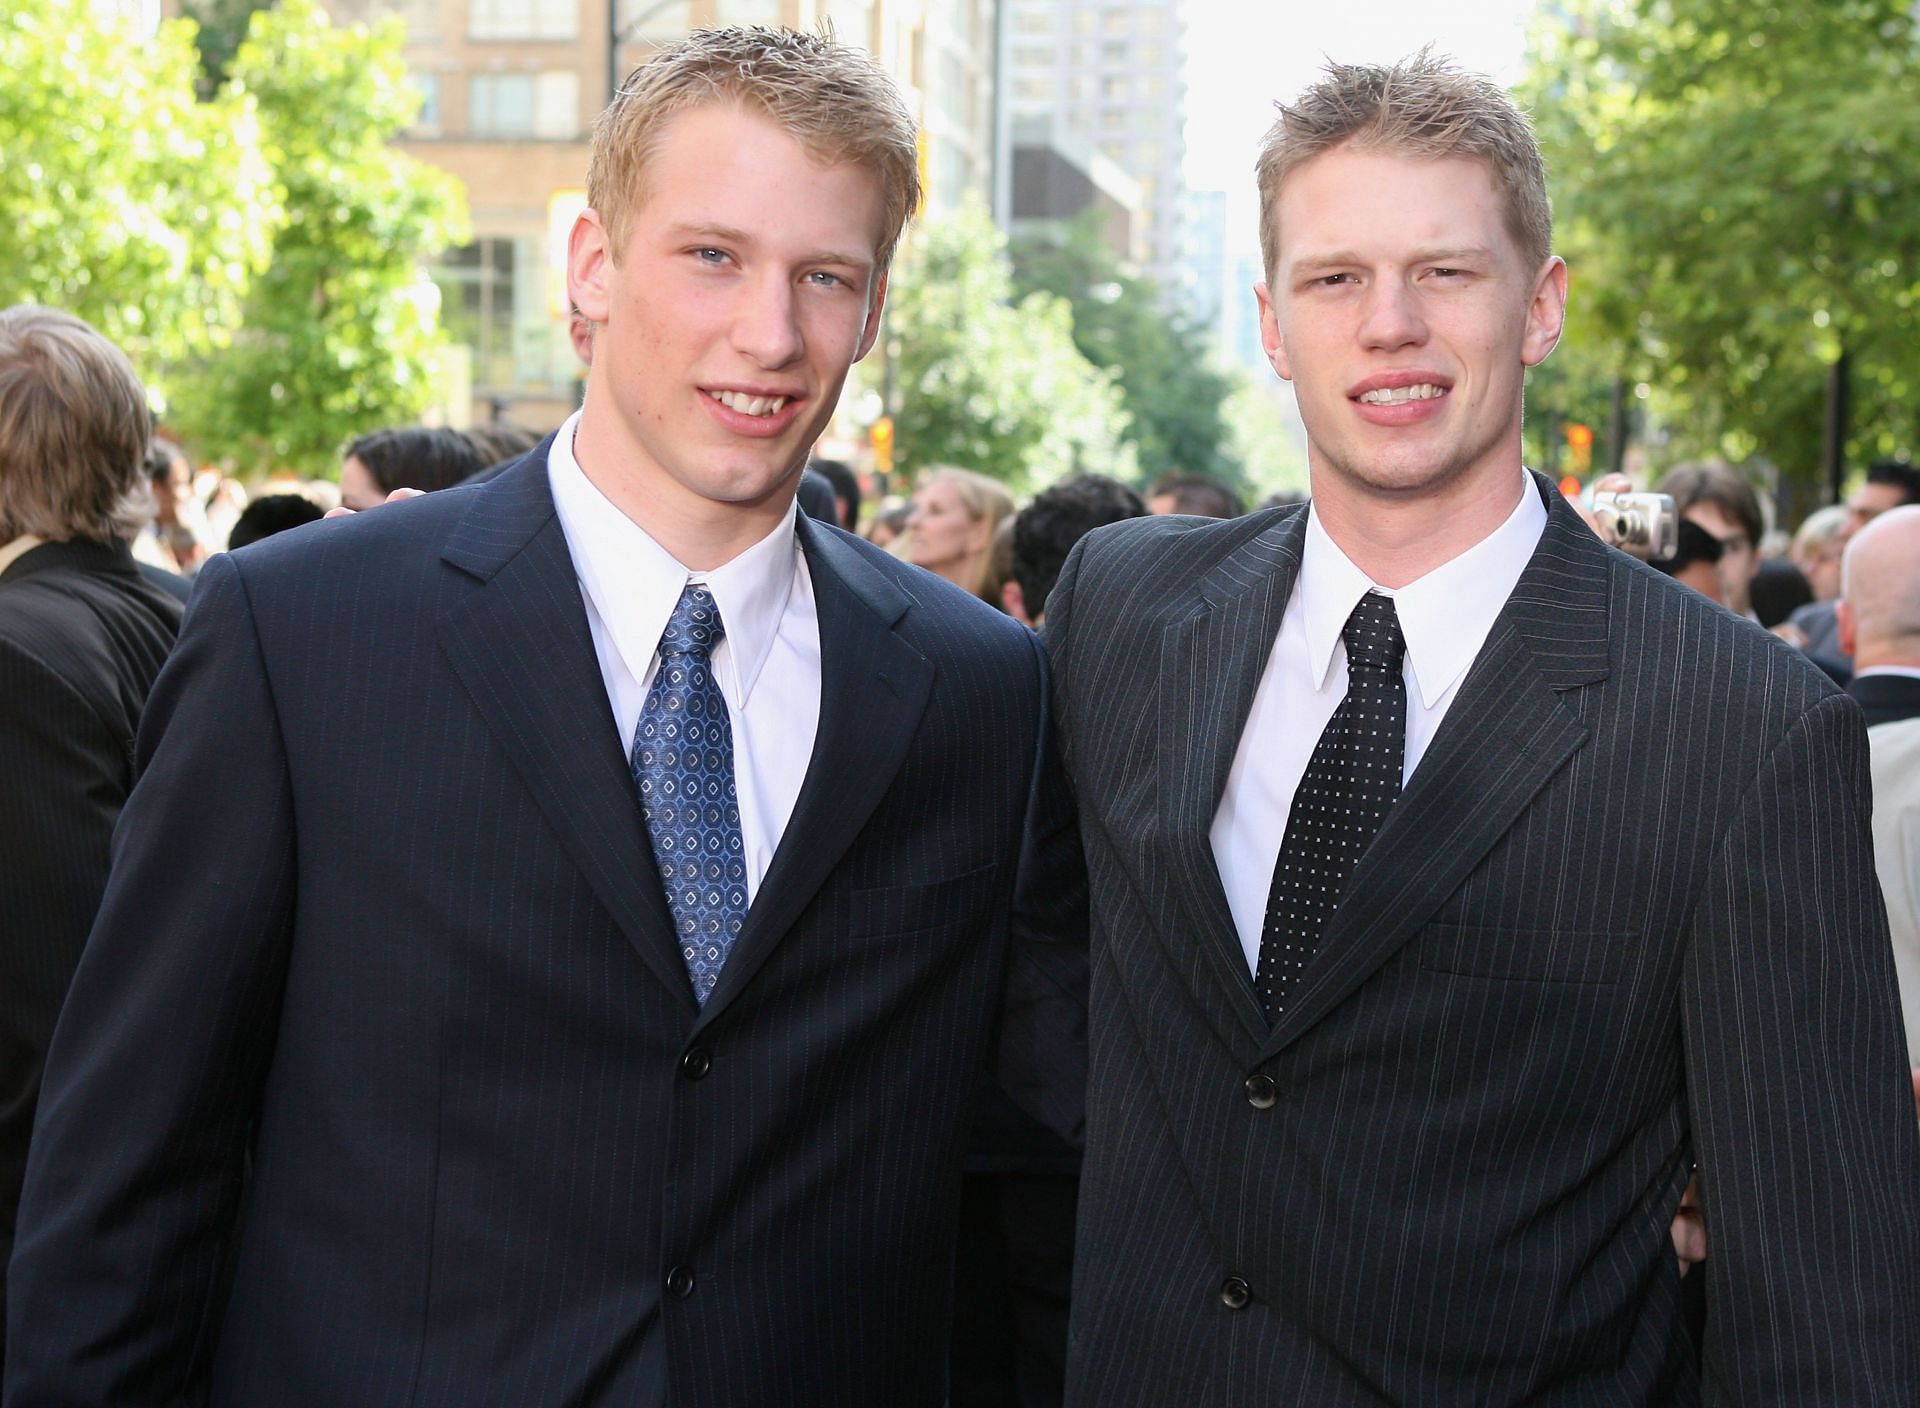 TSN on X: The Staal brothers have made NHL history tonight, after